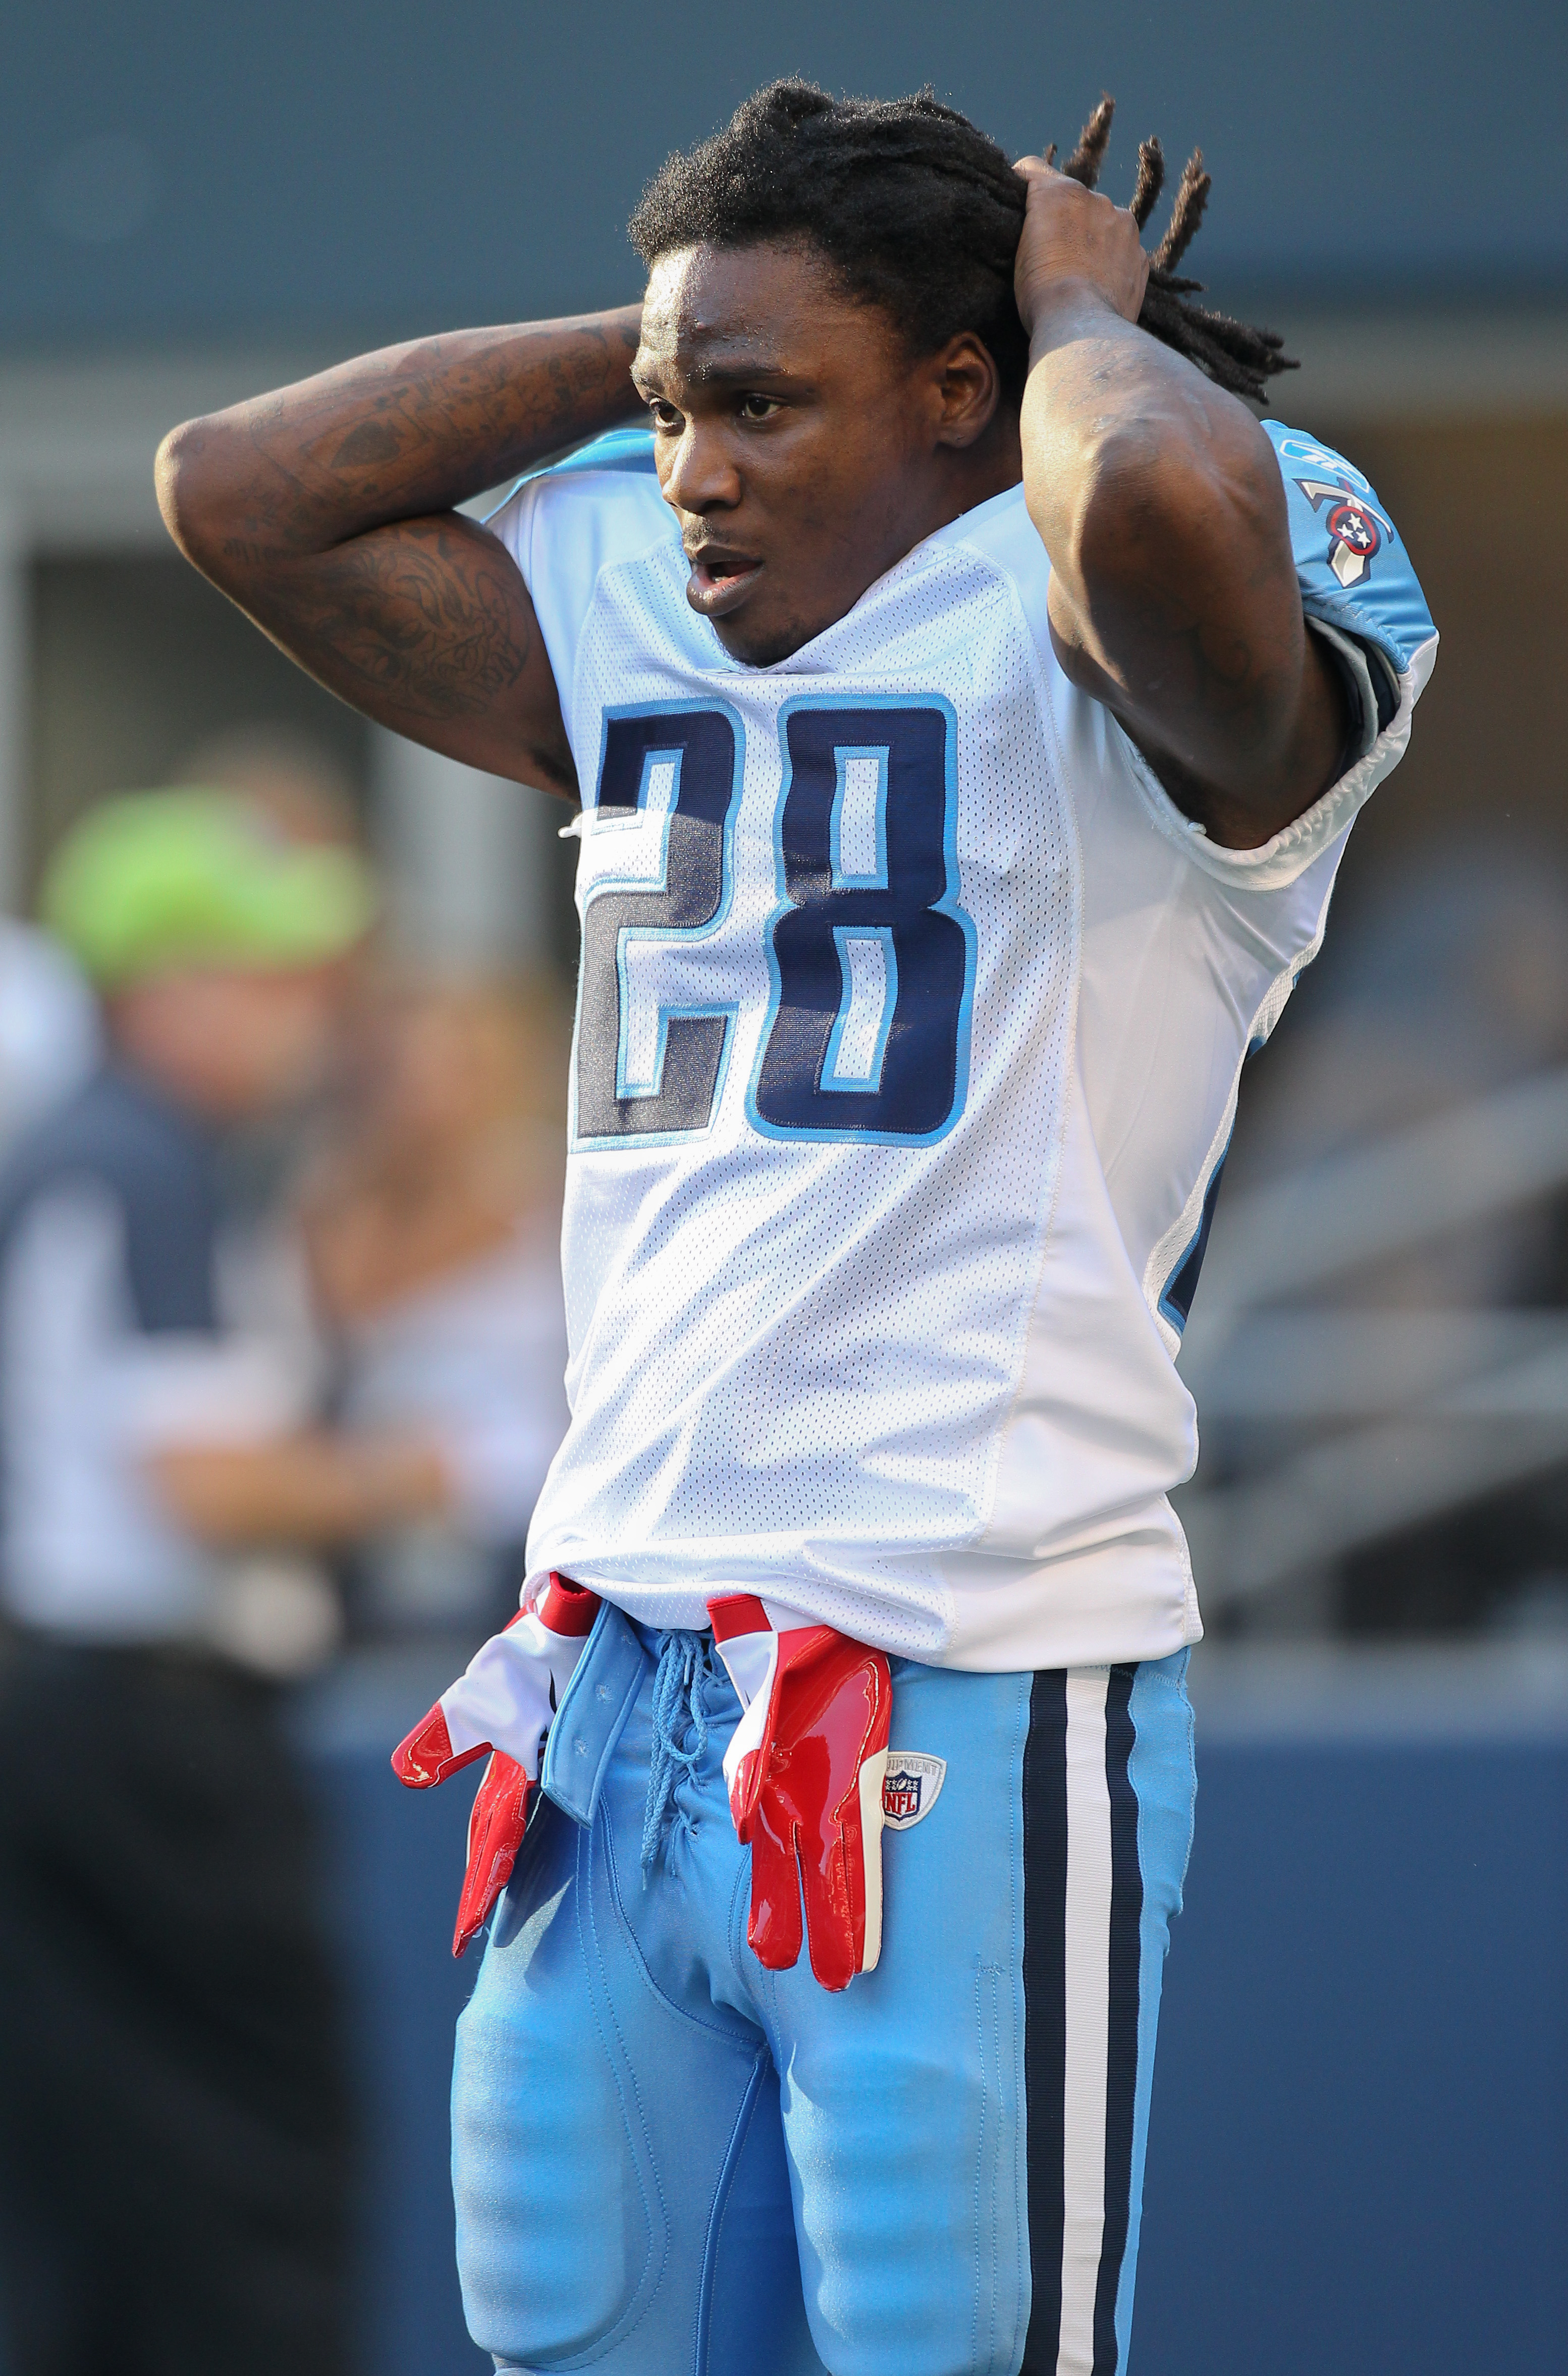 SEATTLE - AUGUST 14:  Running back Chris Johnson #28 of the Tennessee Titans looks on prior to the preseason game against the Seattle Seahawks at Qwest Field on August 14, 2010 in Seattle, Washington. (Photo by Otto Greule Jr/Getty Images)